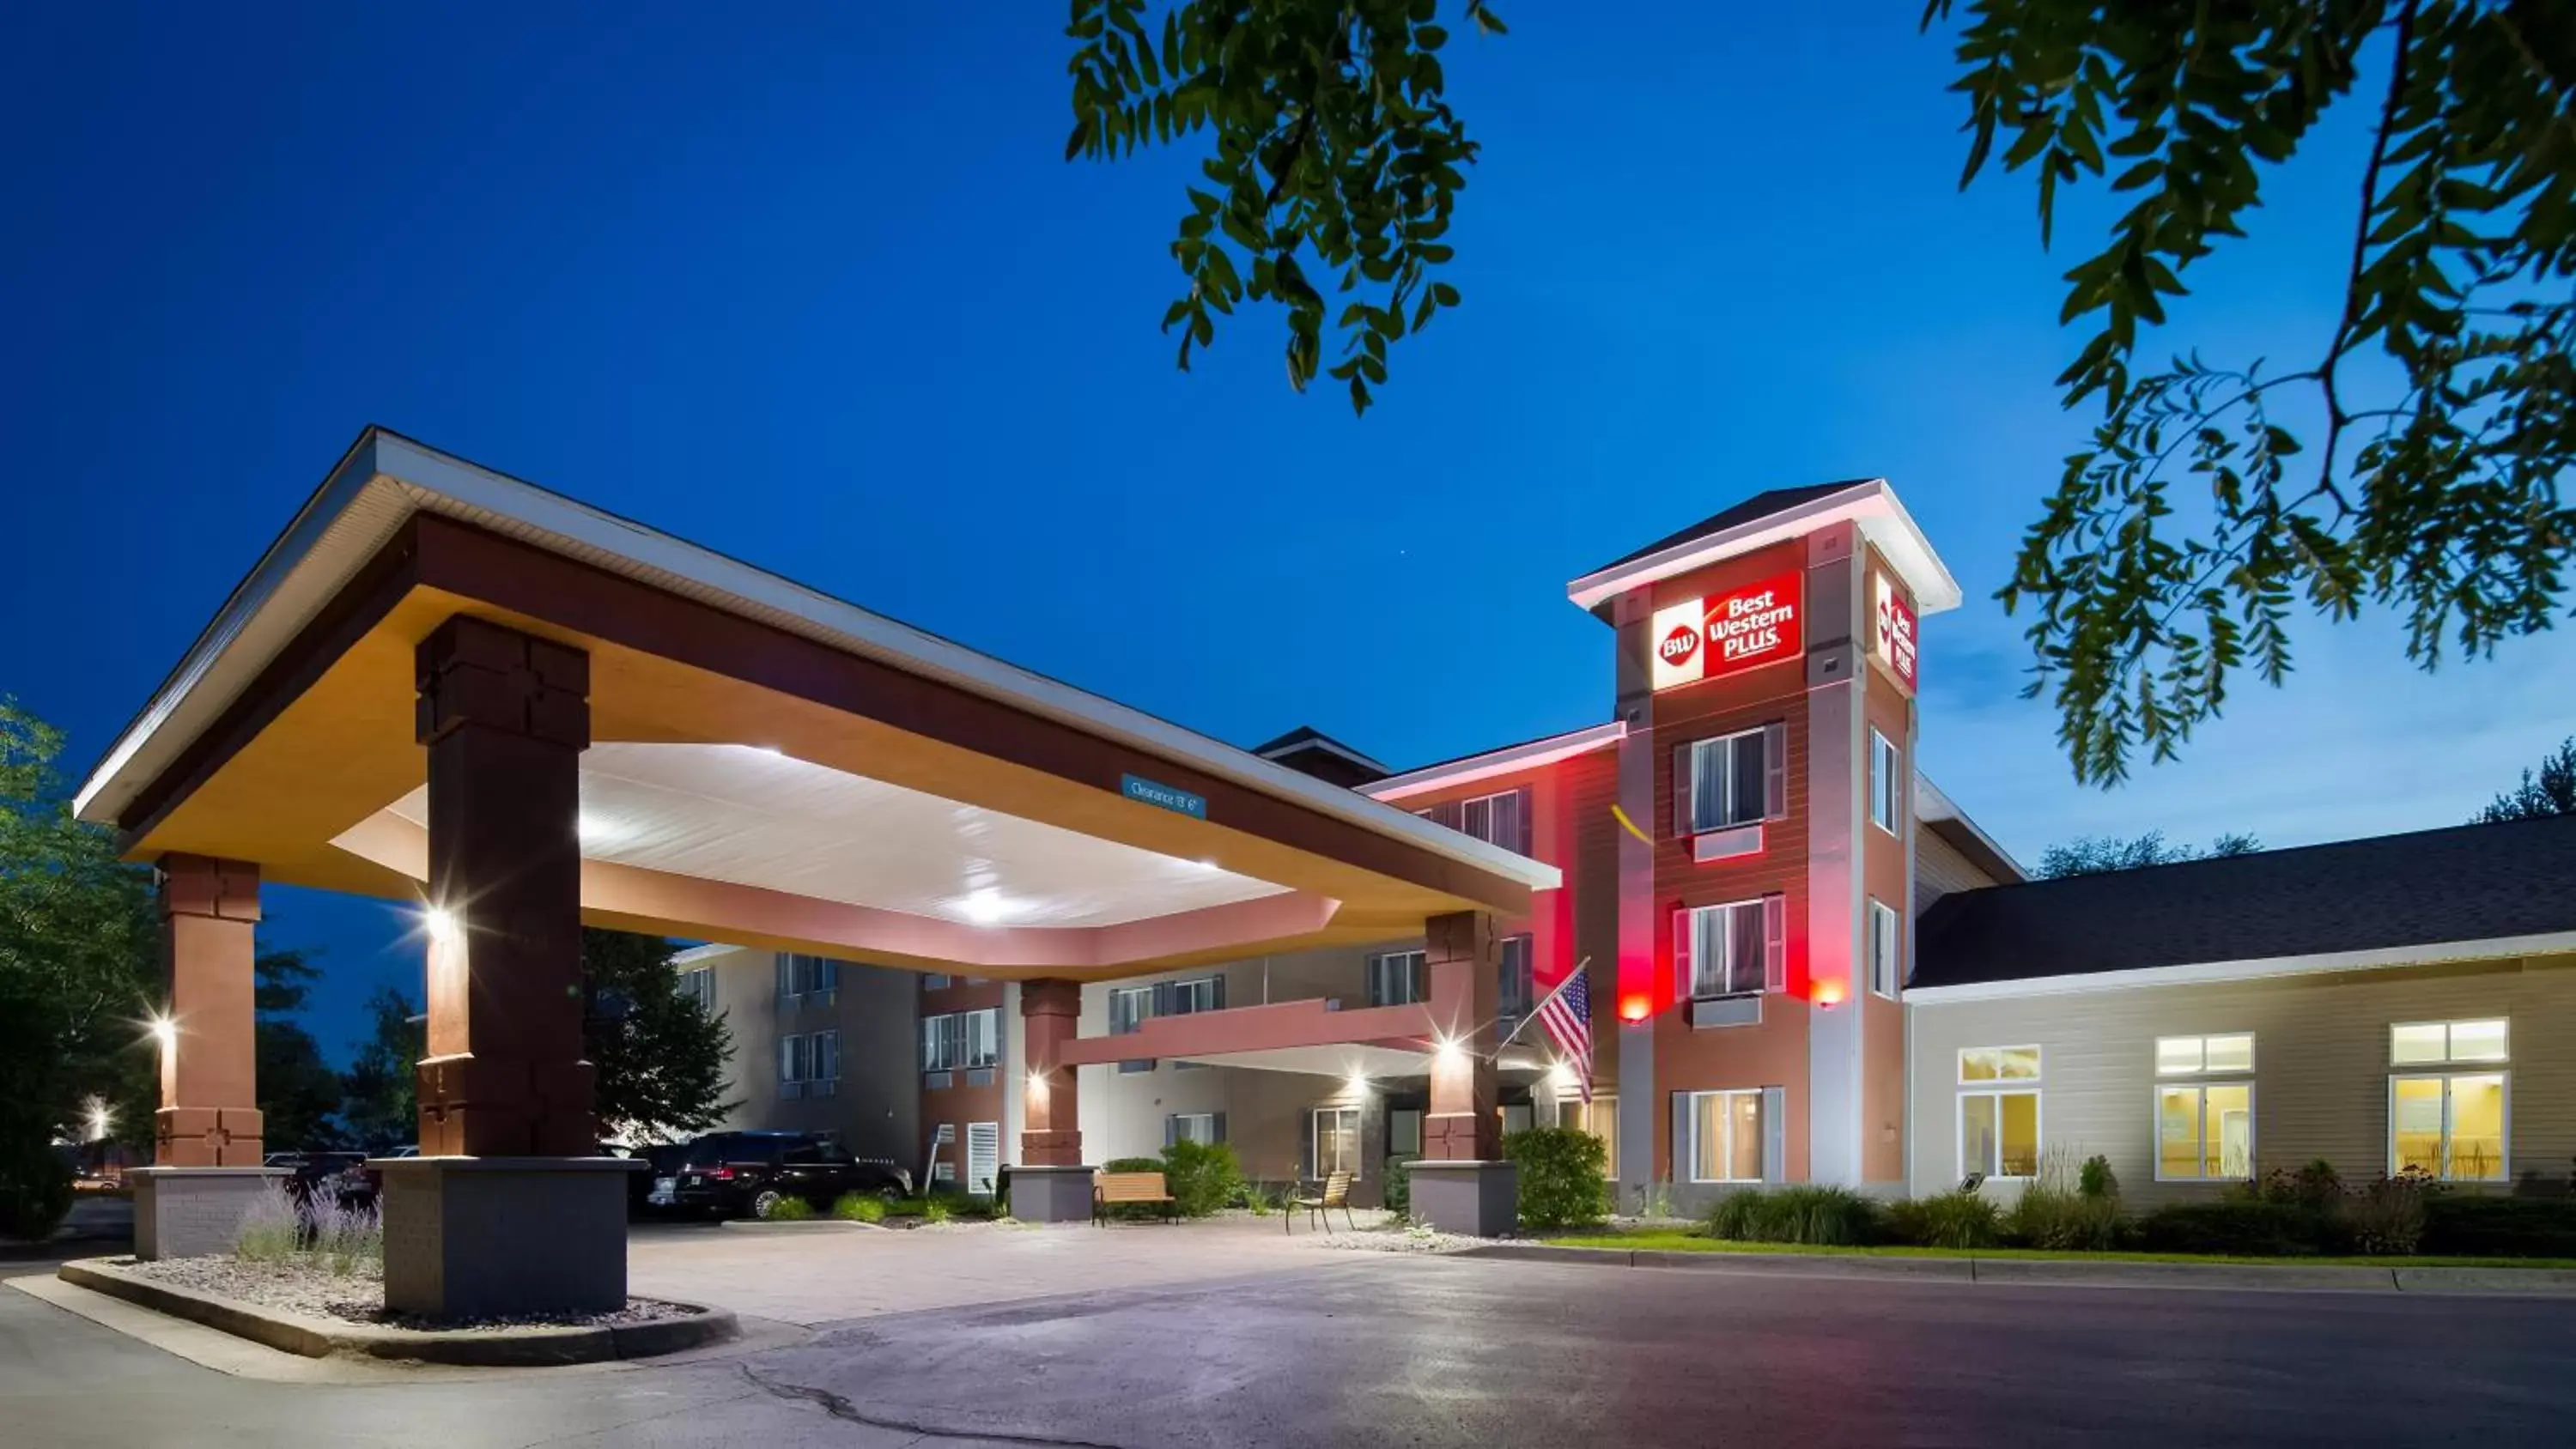 Property Building in Best Western Plus Coldwater Hotel